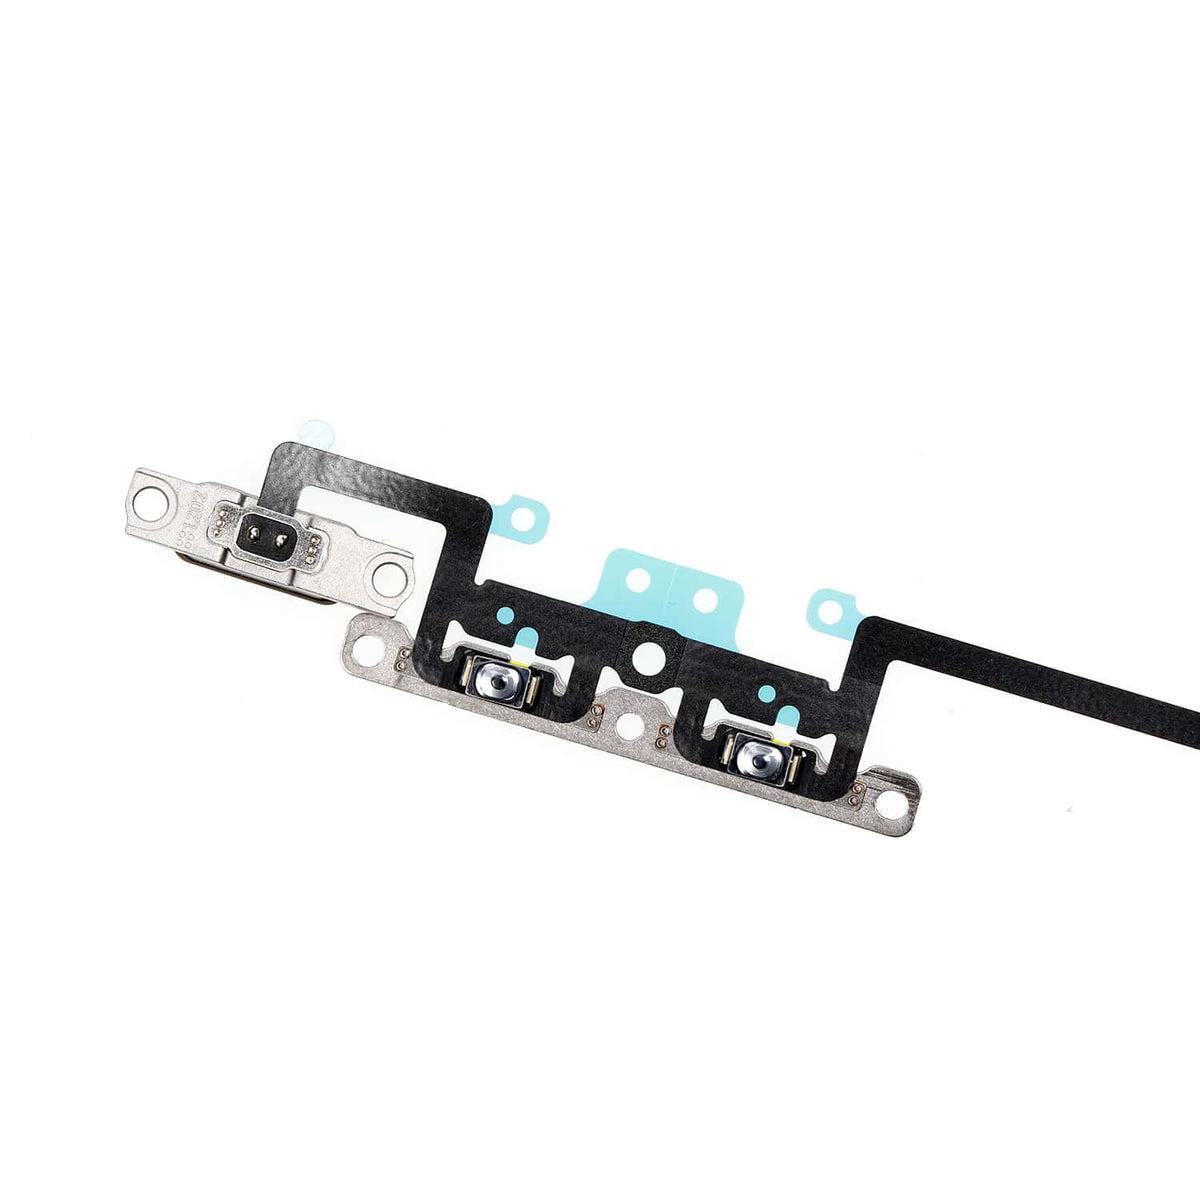 VOLUME BUTTON FLEX CABLE WITH METAL BRACKET ASSEMBLY FOR IPHONE 11 PRO